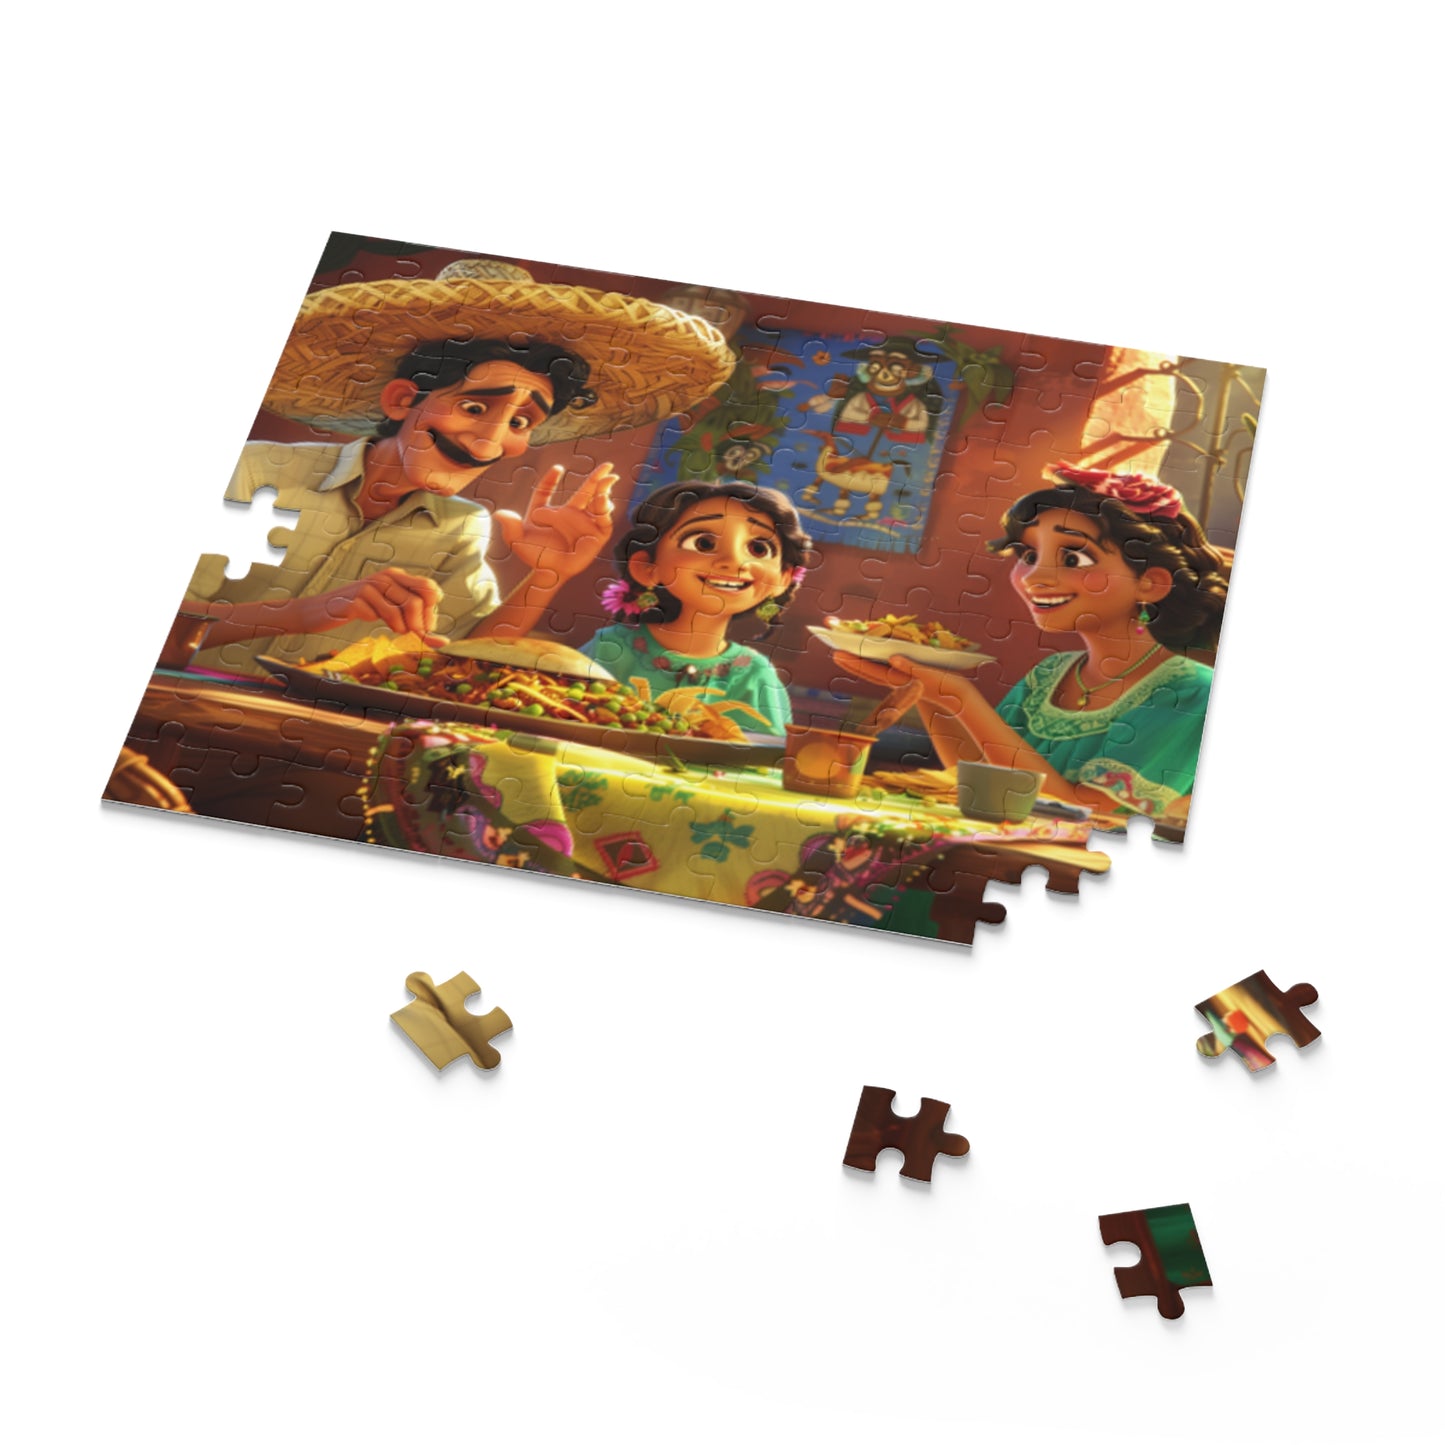 Mexican Happy Family Sitting Retro Art Jigsaw Puzzle Adult Birthday Business Jigsaw Puzzle Gift for Him Funny Humorous Indoor Outdoor Game Gift For Her Online-7